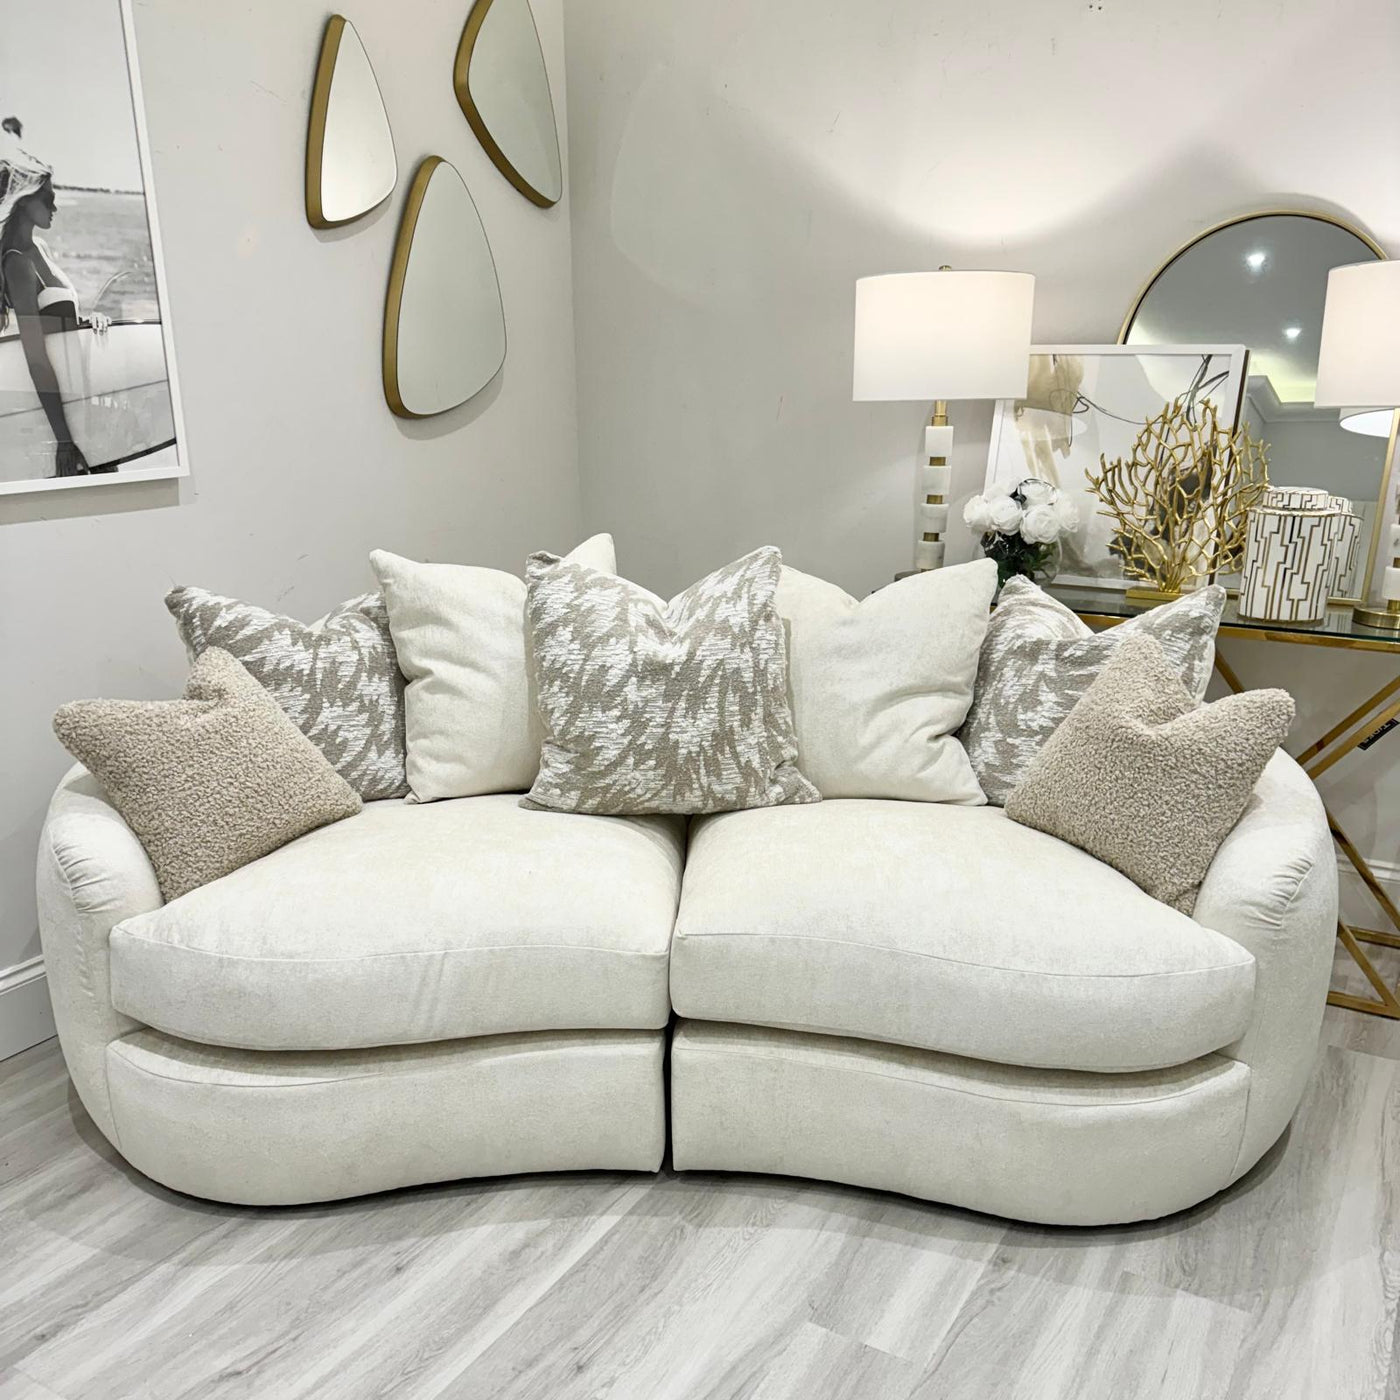 Logan Sofa-Pearl with Natural & Latte Scatters